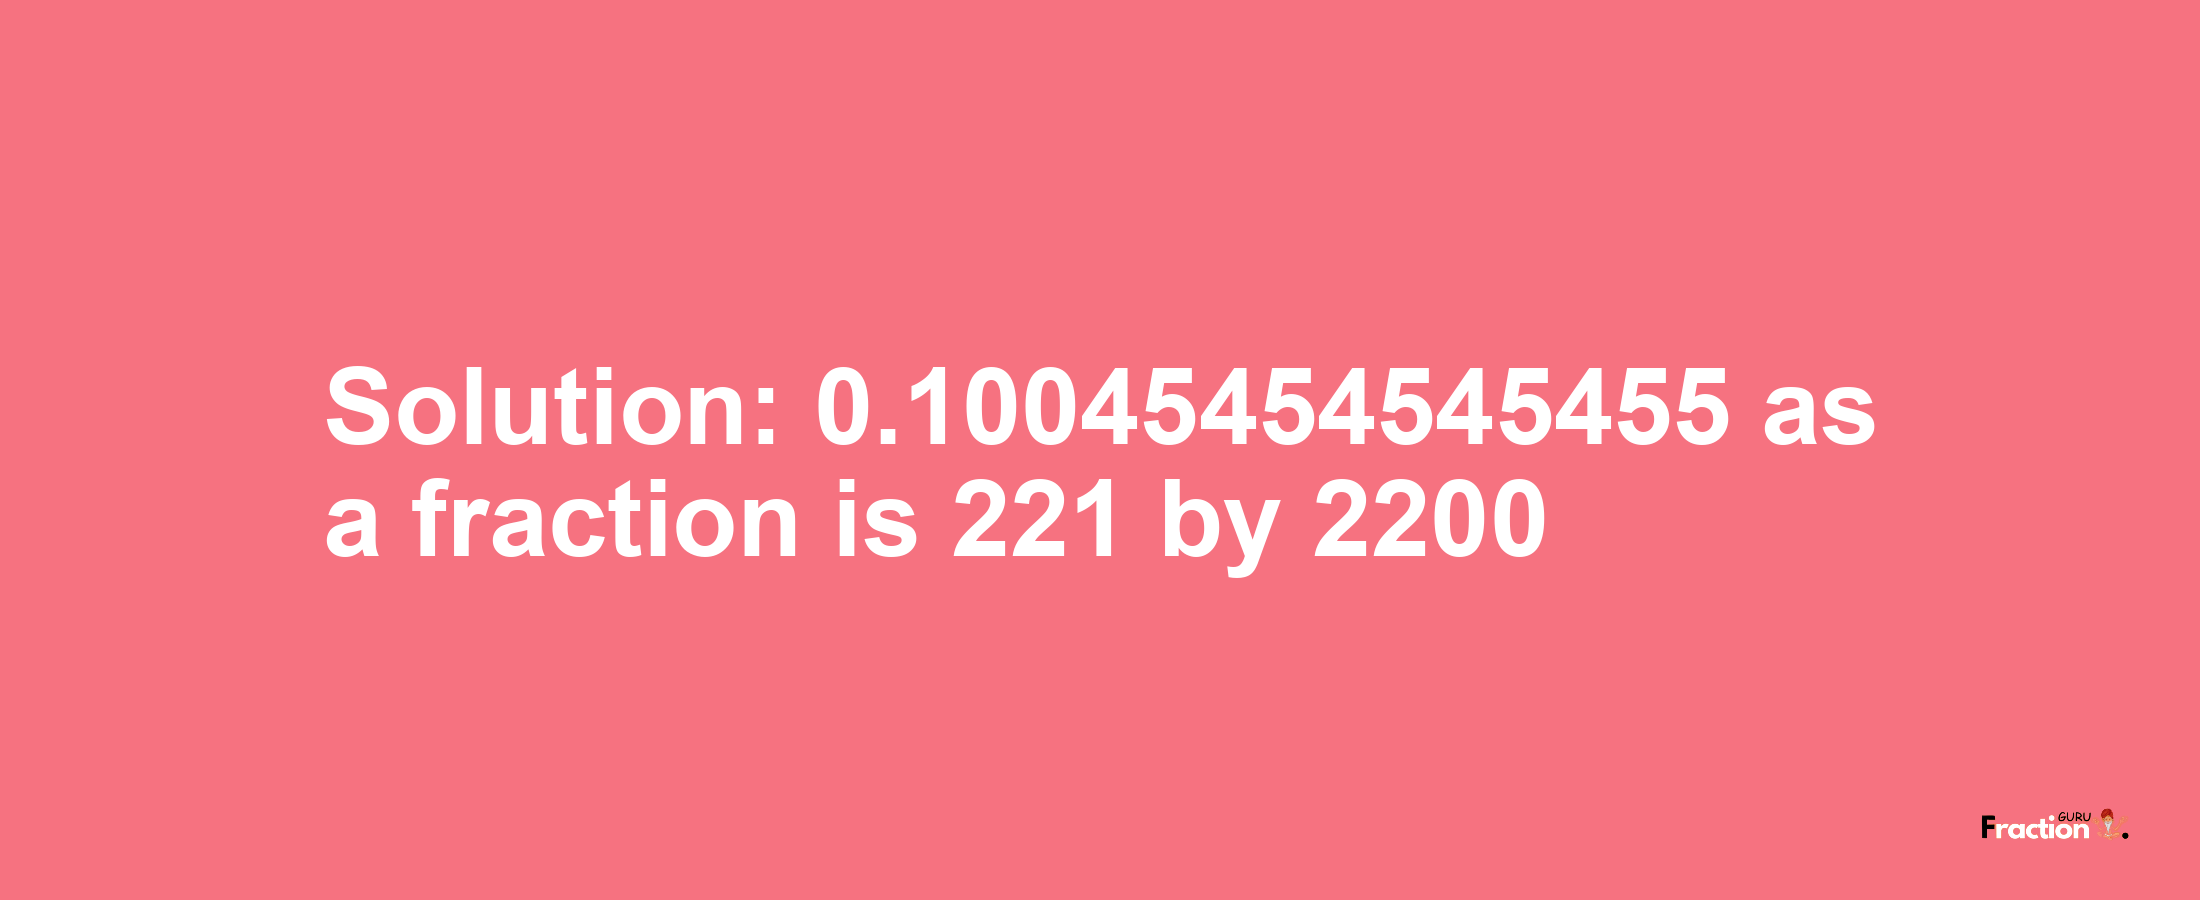 Solution:0.10045454545455 as a fraction is 221/2200